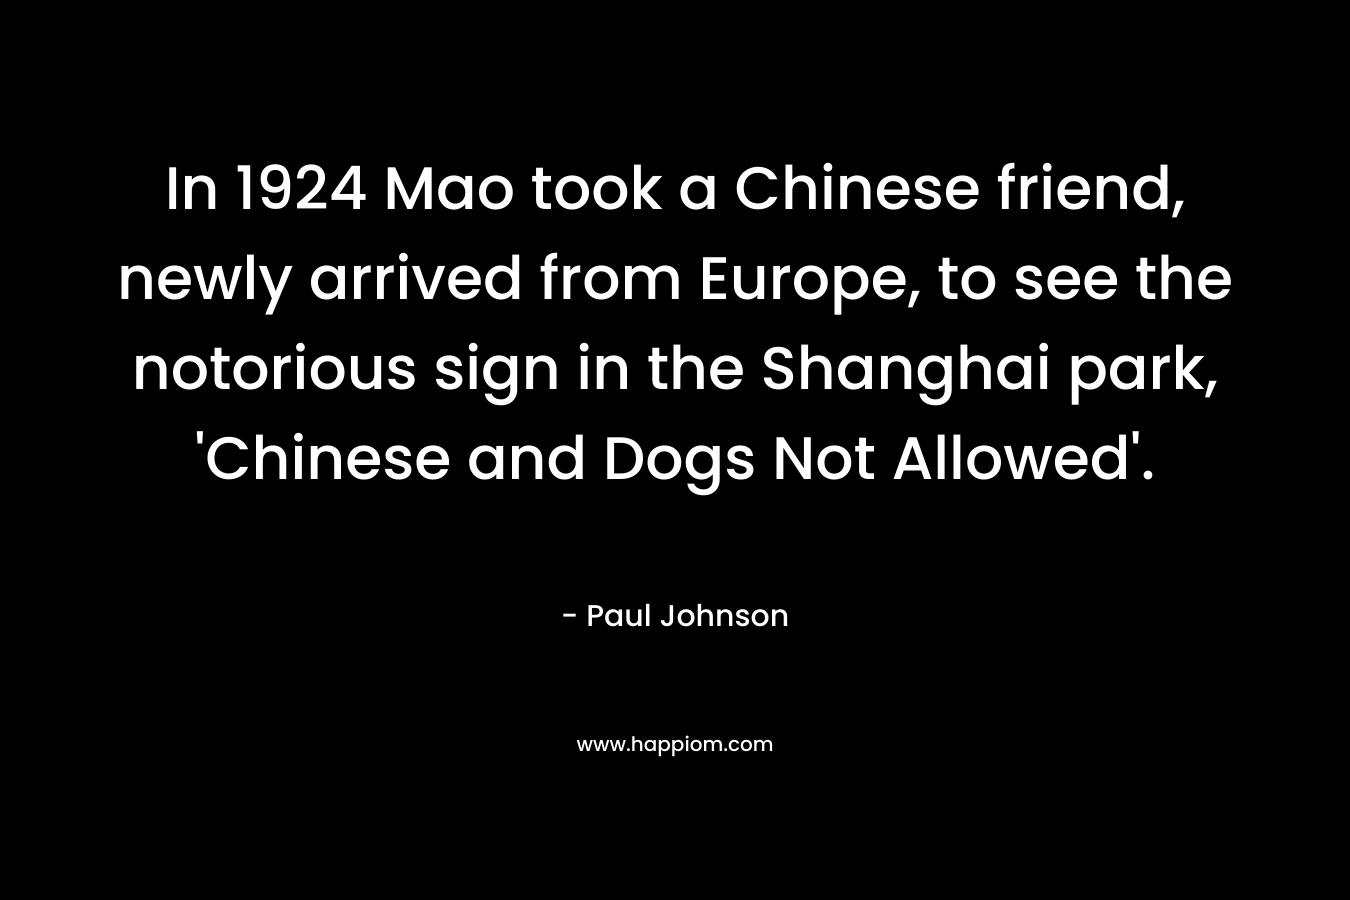 In 1924 Mao took a Chinese friend, newly arrived from Europe, to see the notorious sign in the Shanghai park, ‘Chinese and Dogs Not Allowed’. – Paul Johnson